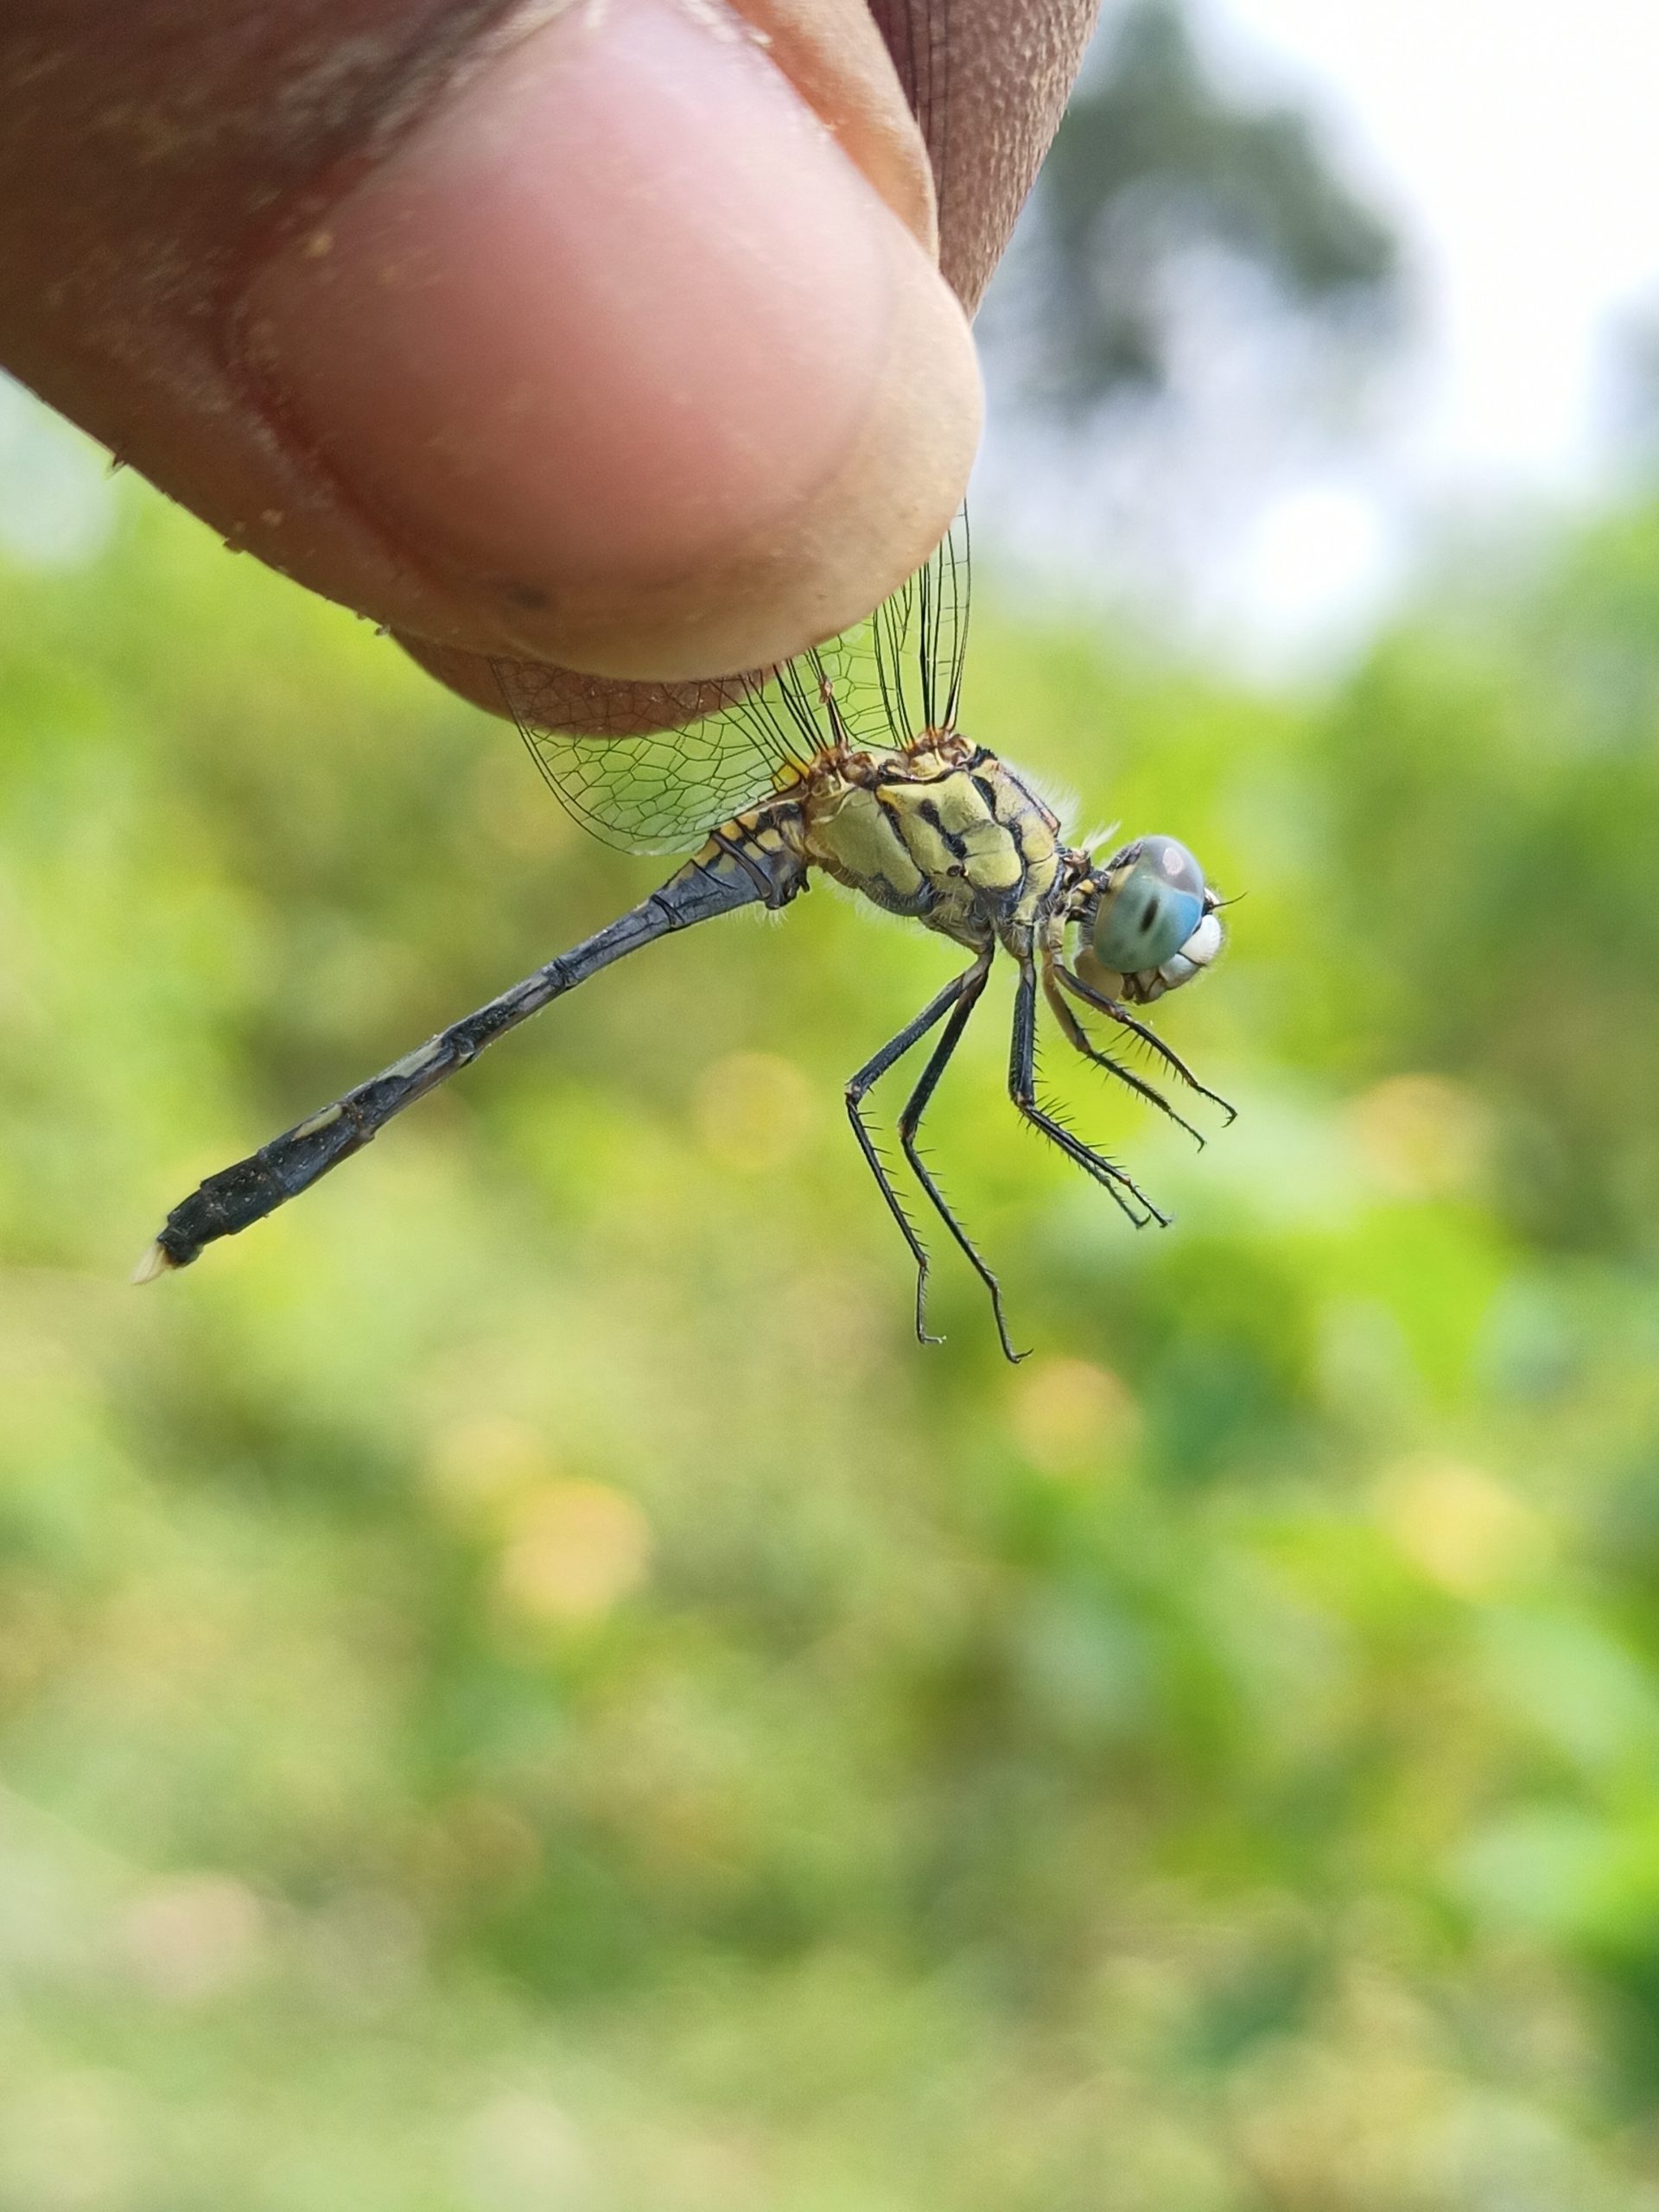 Catching a dragonfly with fingers